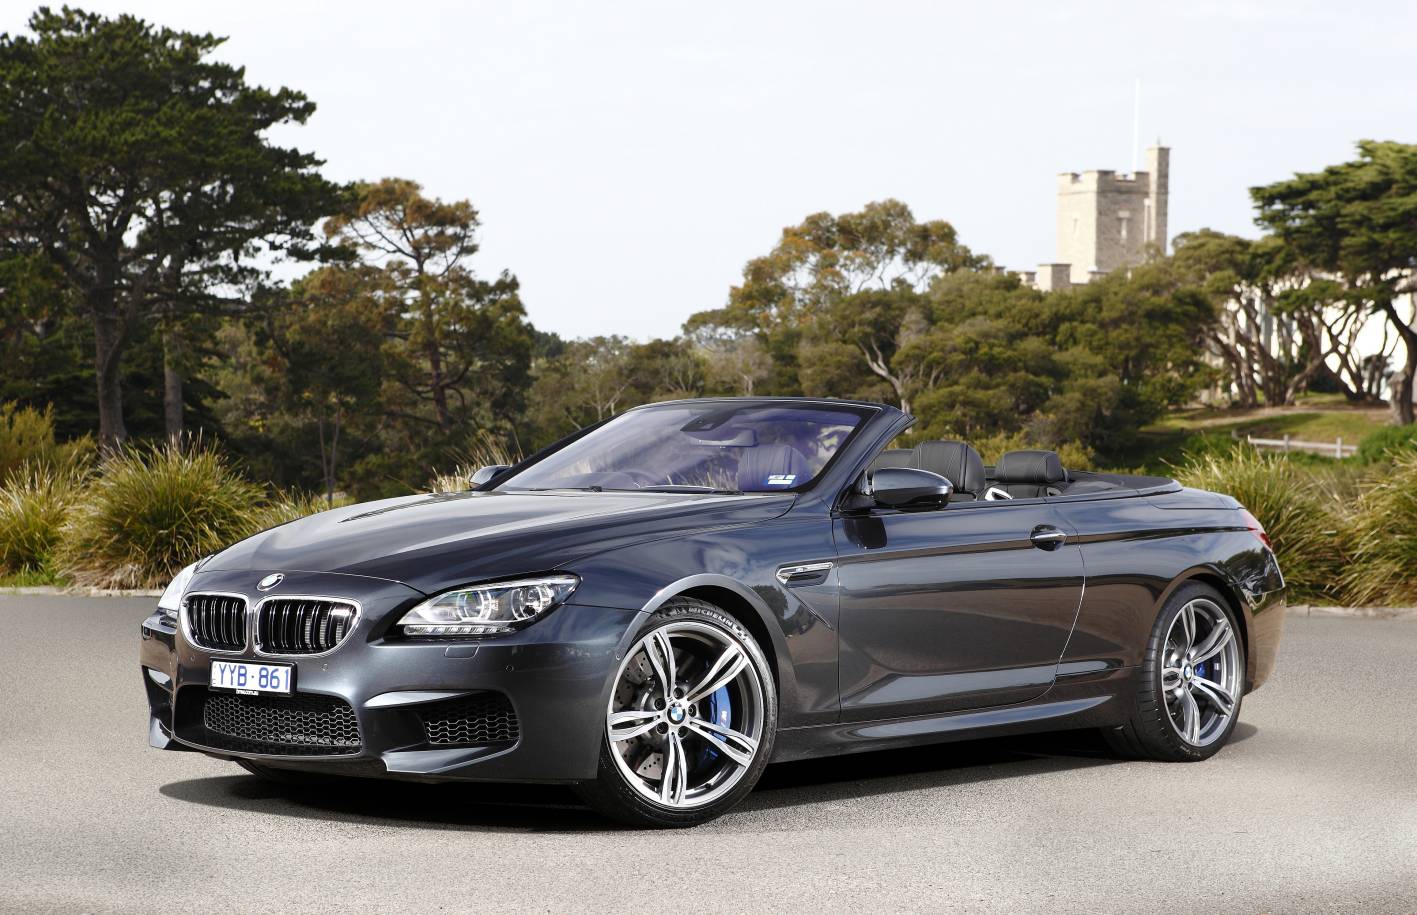 2013 Bmw m6 coupe and convertible #3